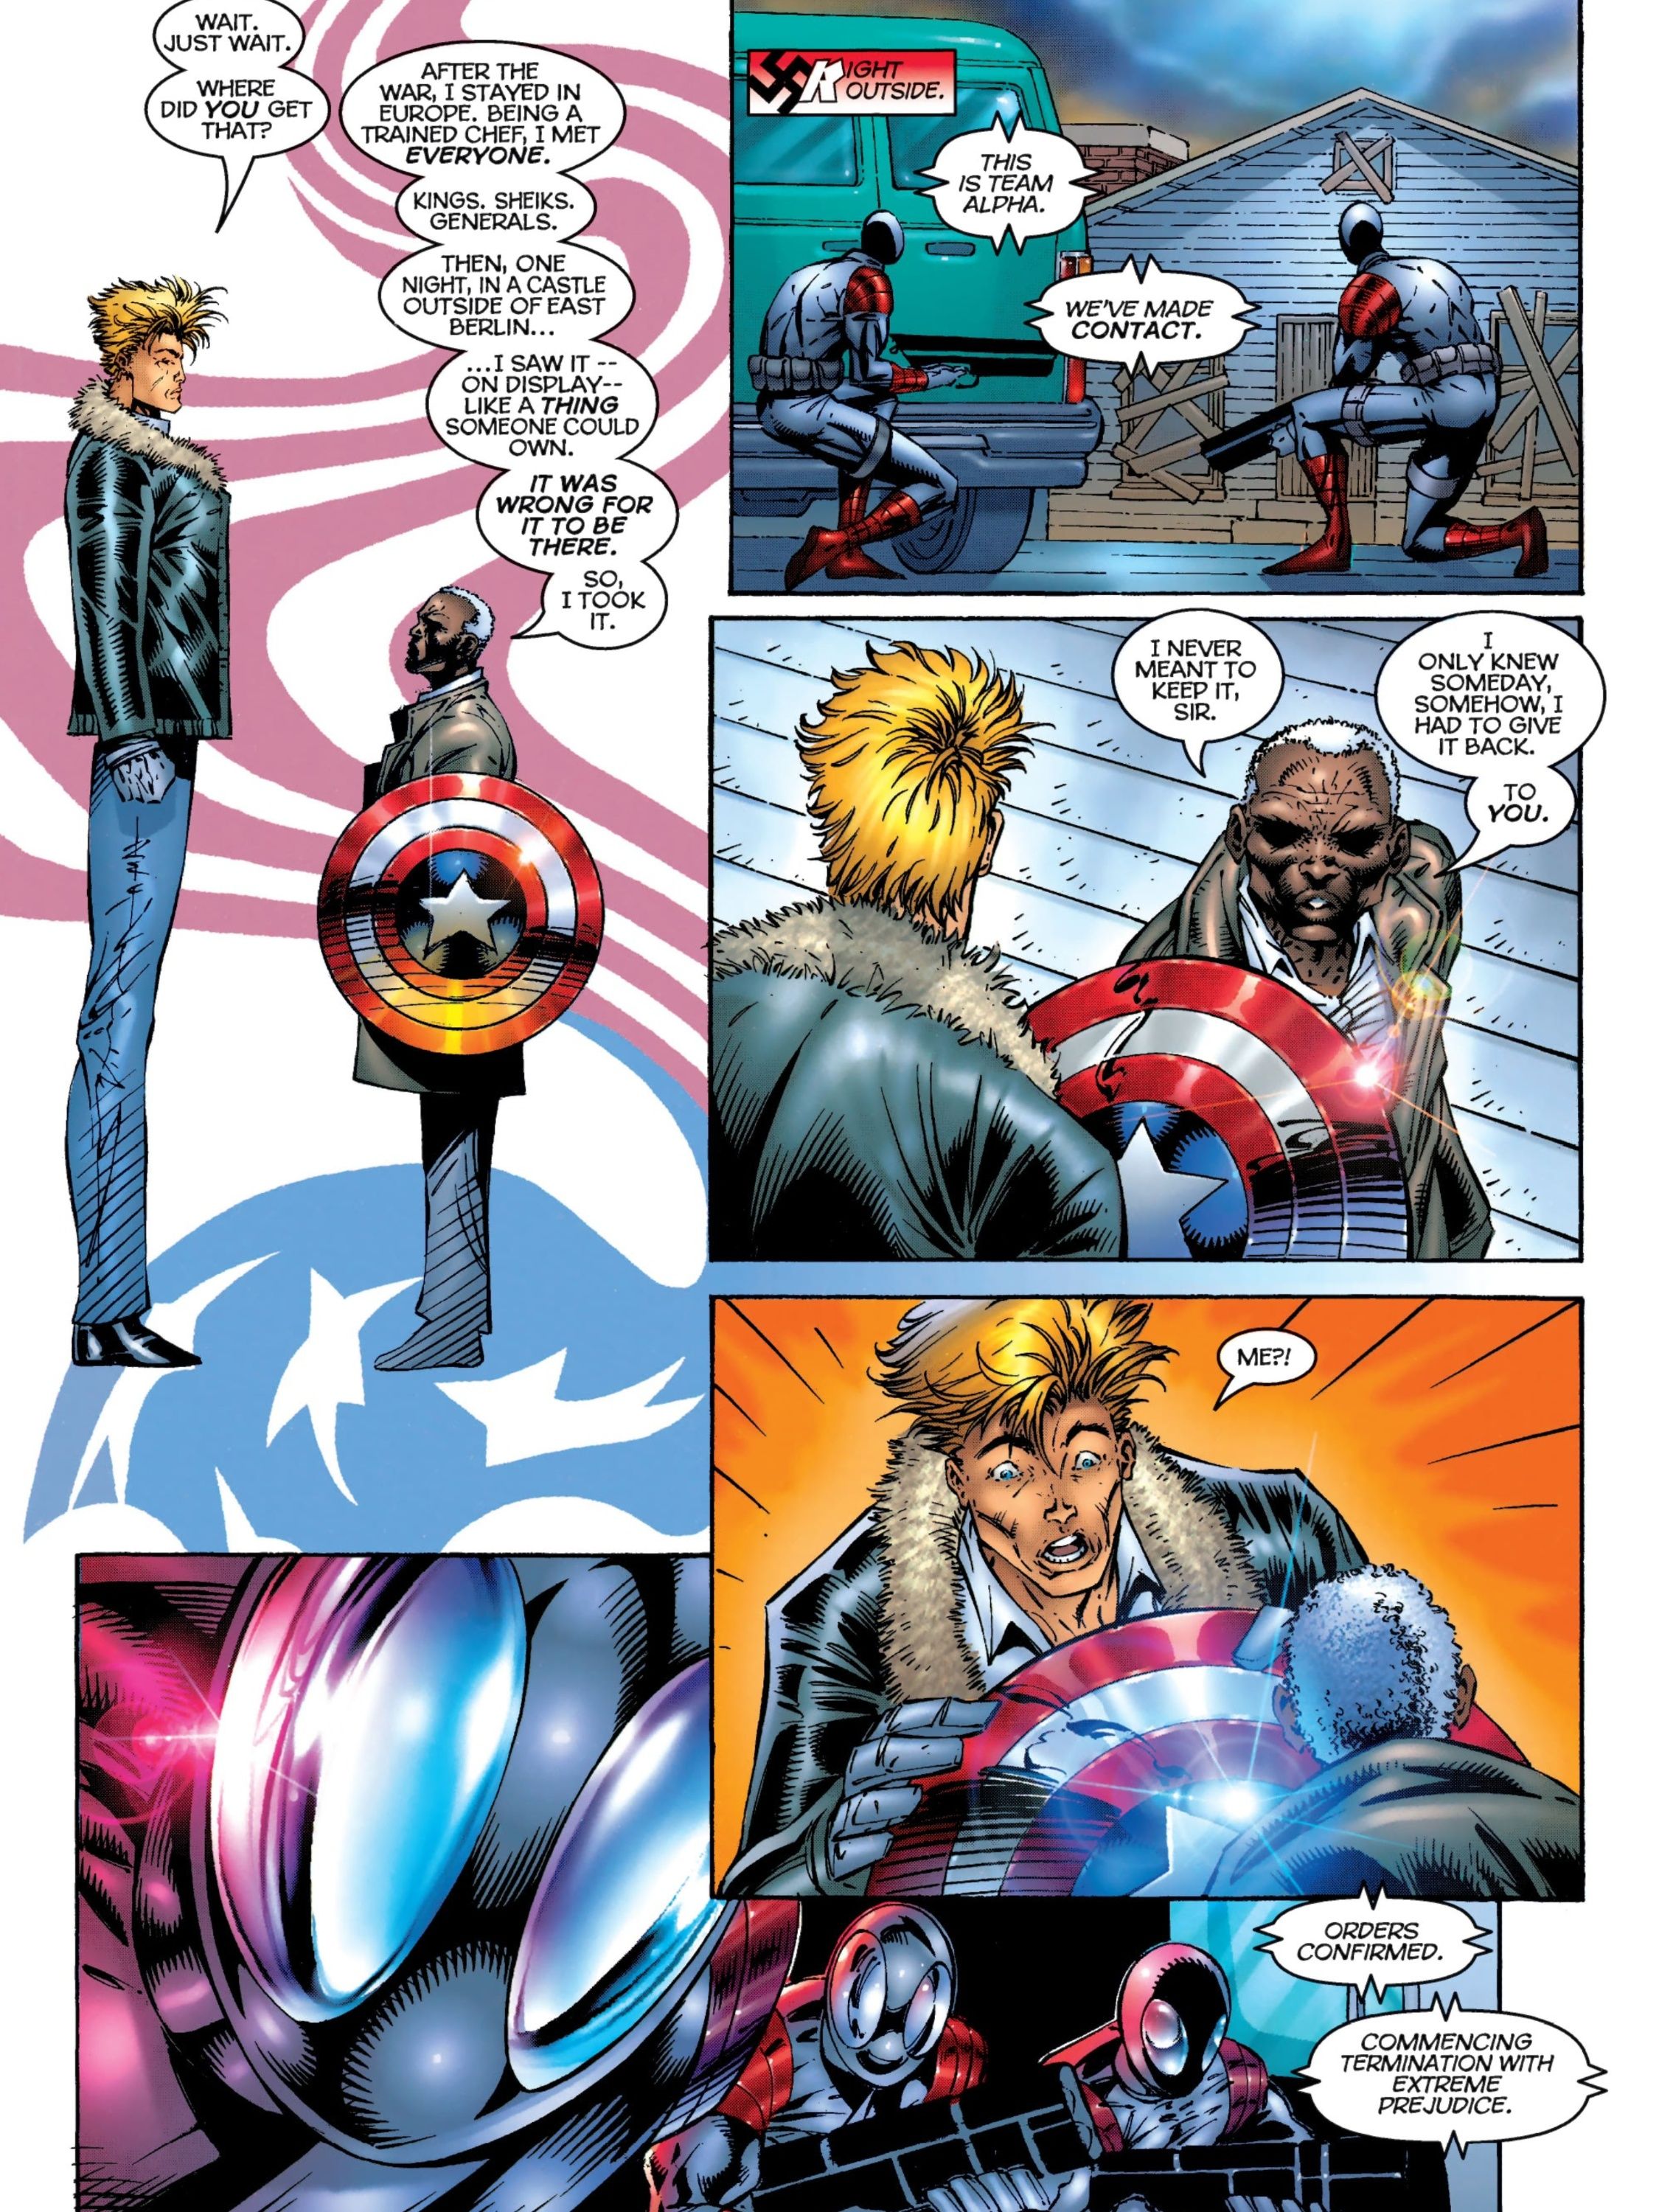 Captain America towering over someone in a Rob Liefeld comics illustration.